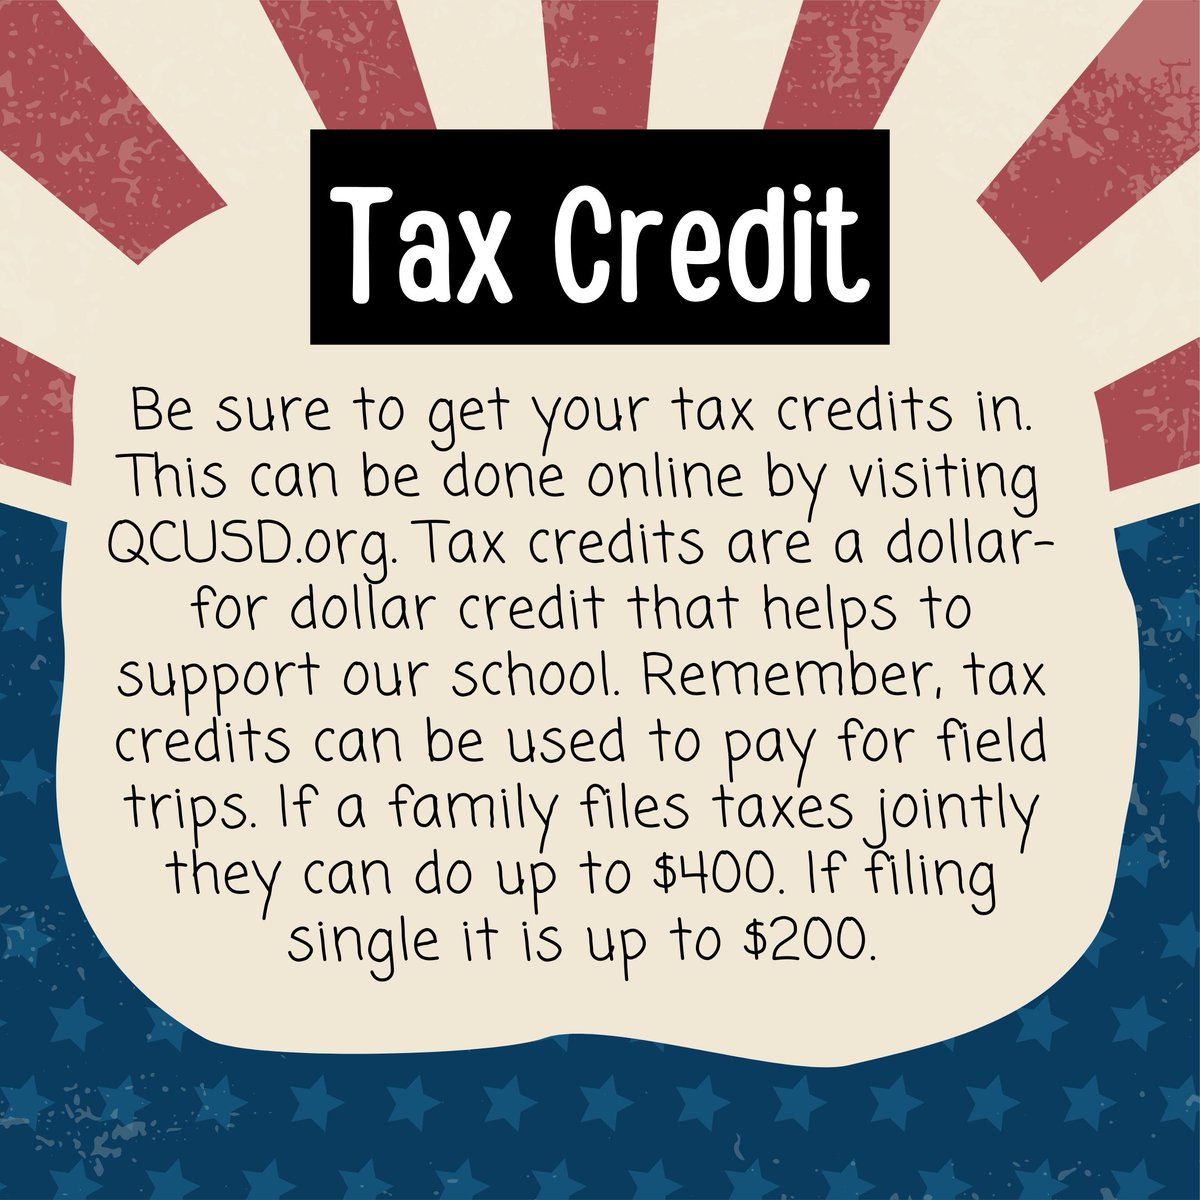 Be sure to get your tax credits in! #qceleads #qcleads